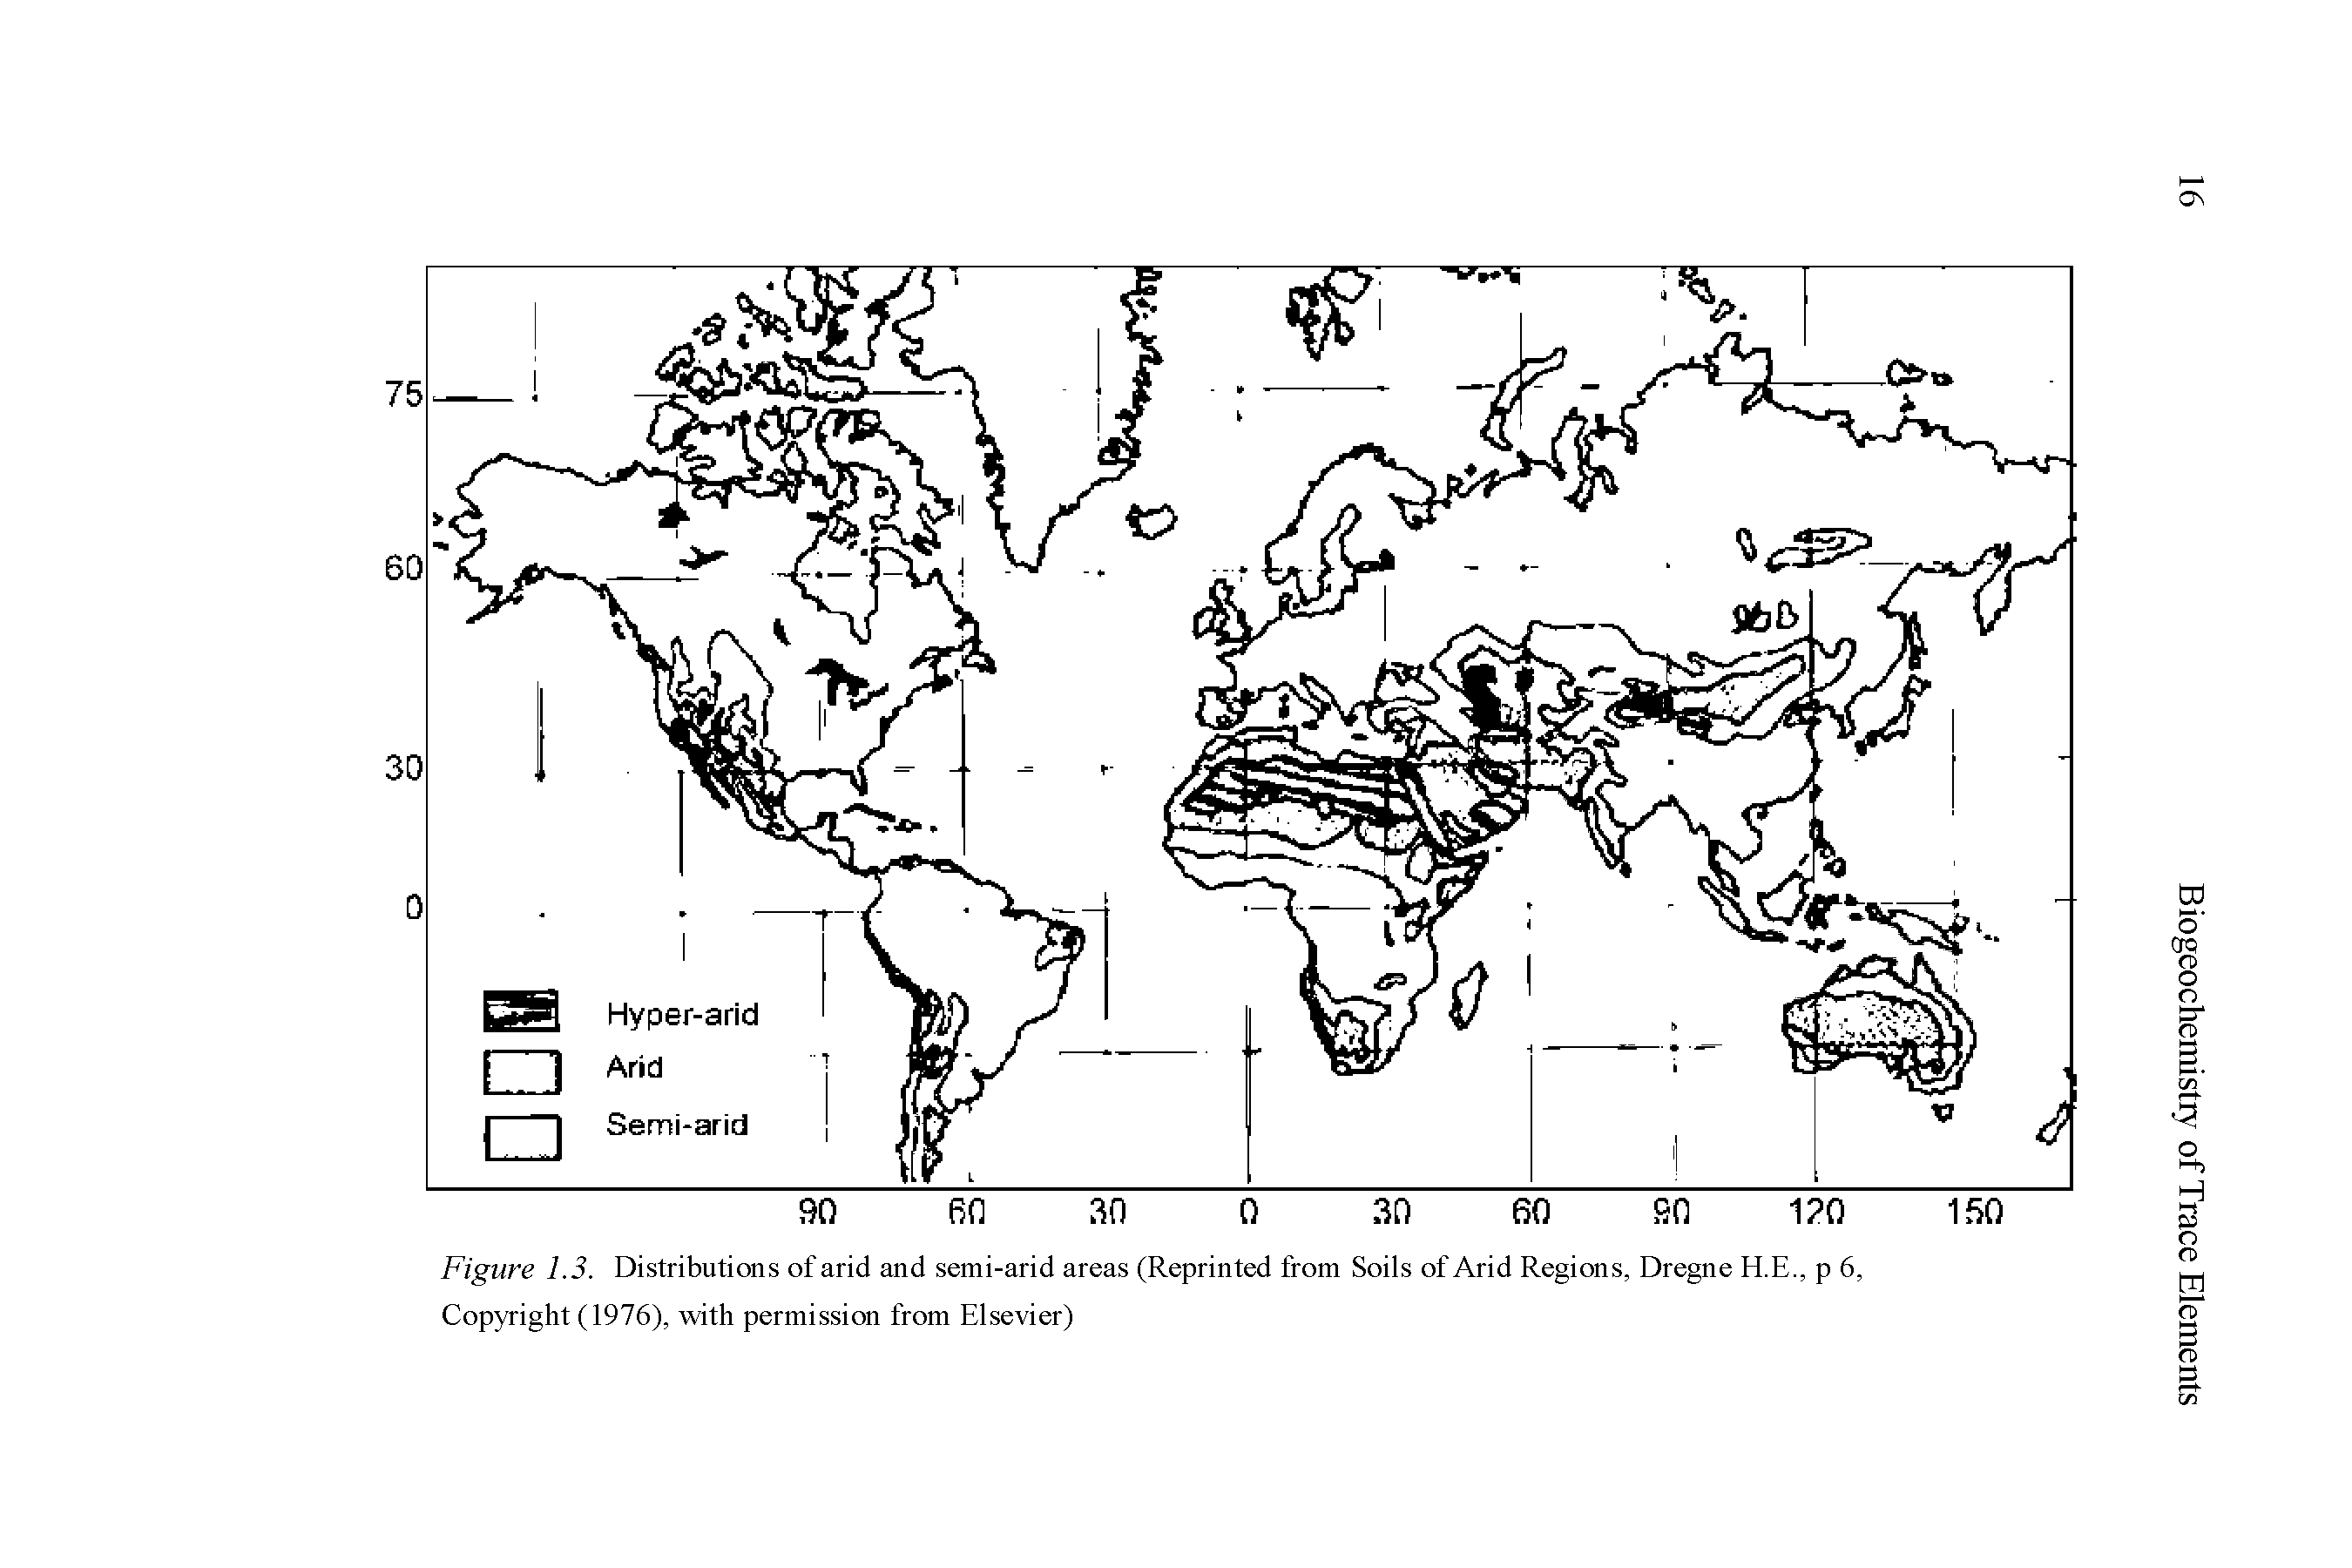 Figure 1.3. Distributions of arid and semi-arid areas (Reprinted from Soils of Arid Regions, Dregne H.E., p 6, Copyright (1976), with permission from Elsevier)...